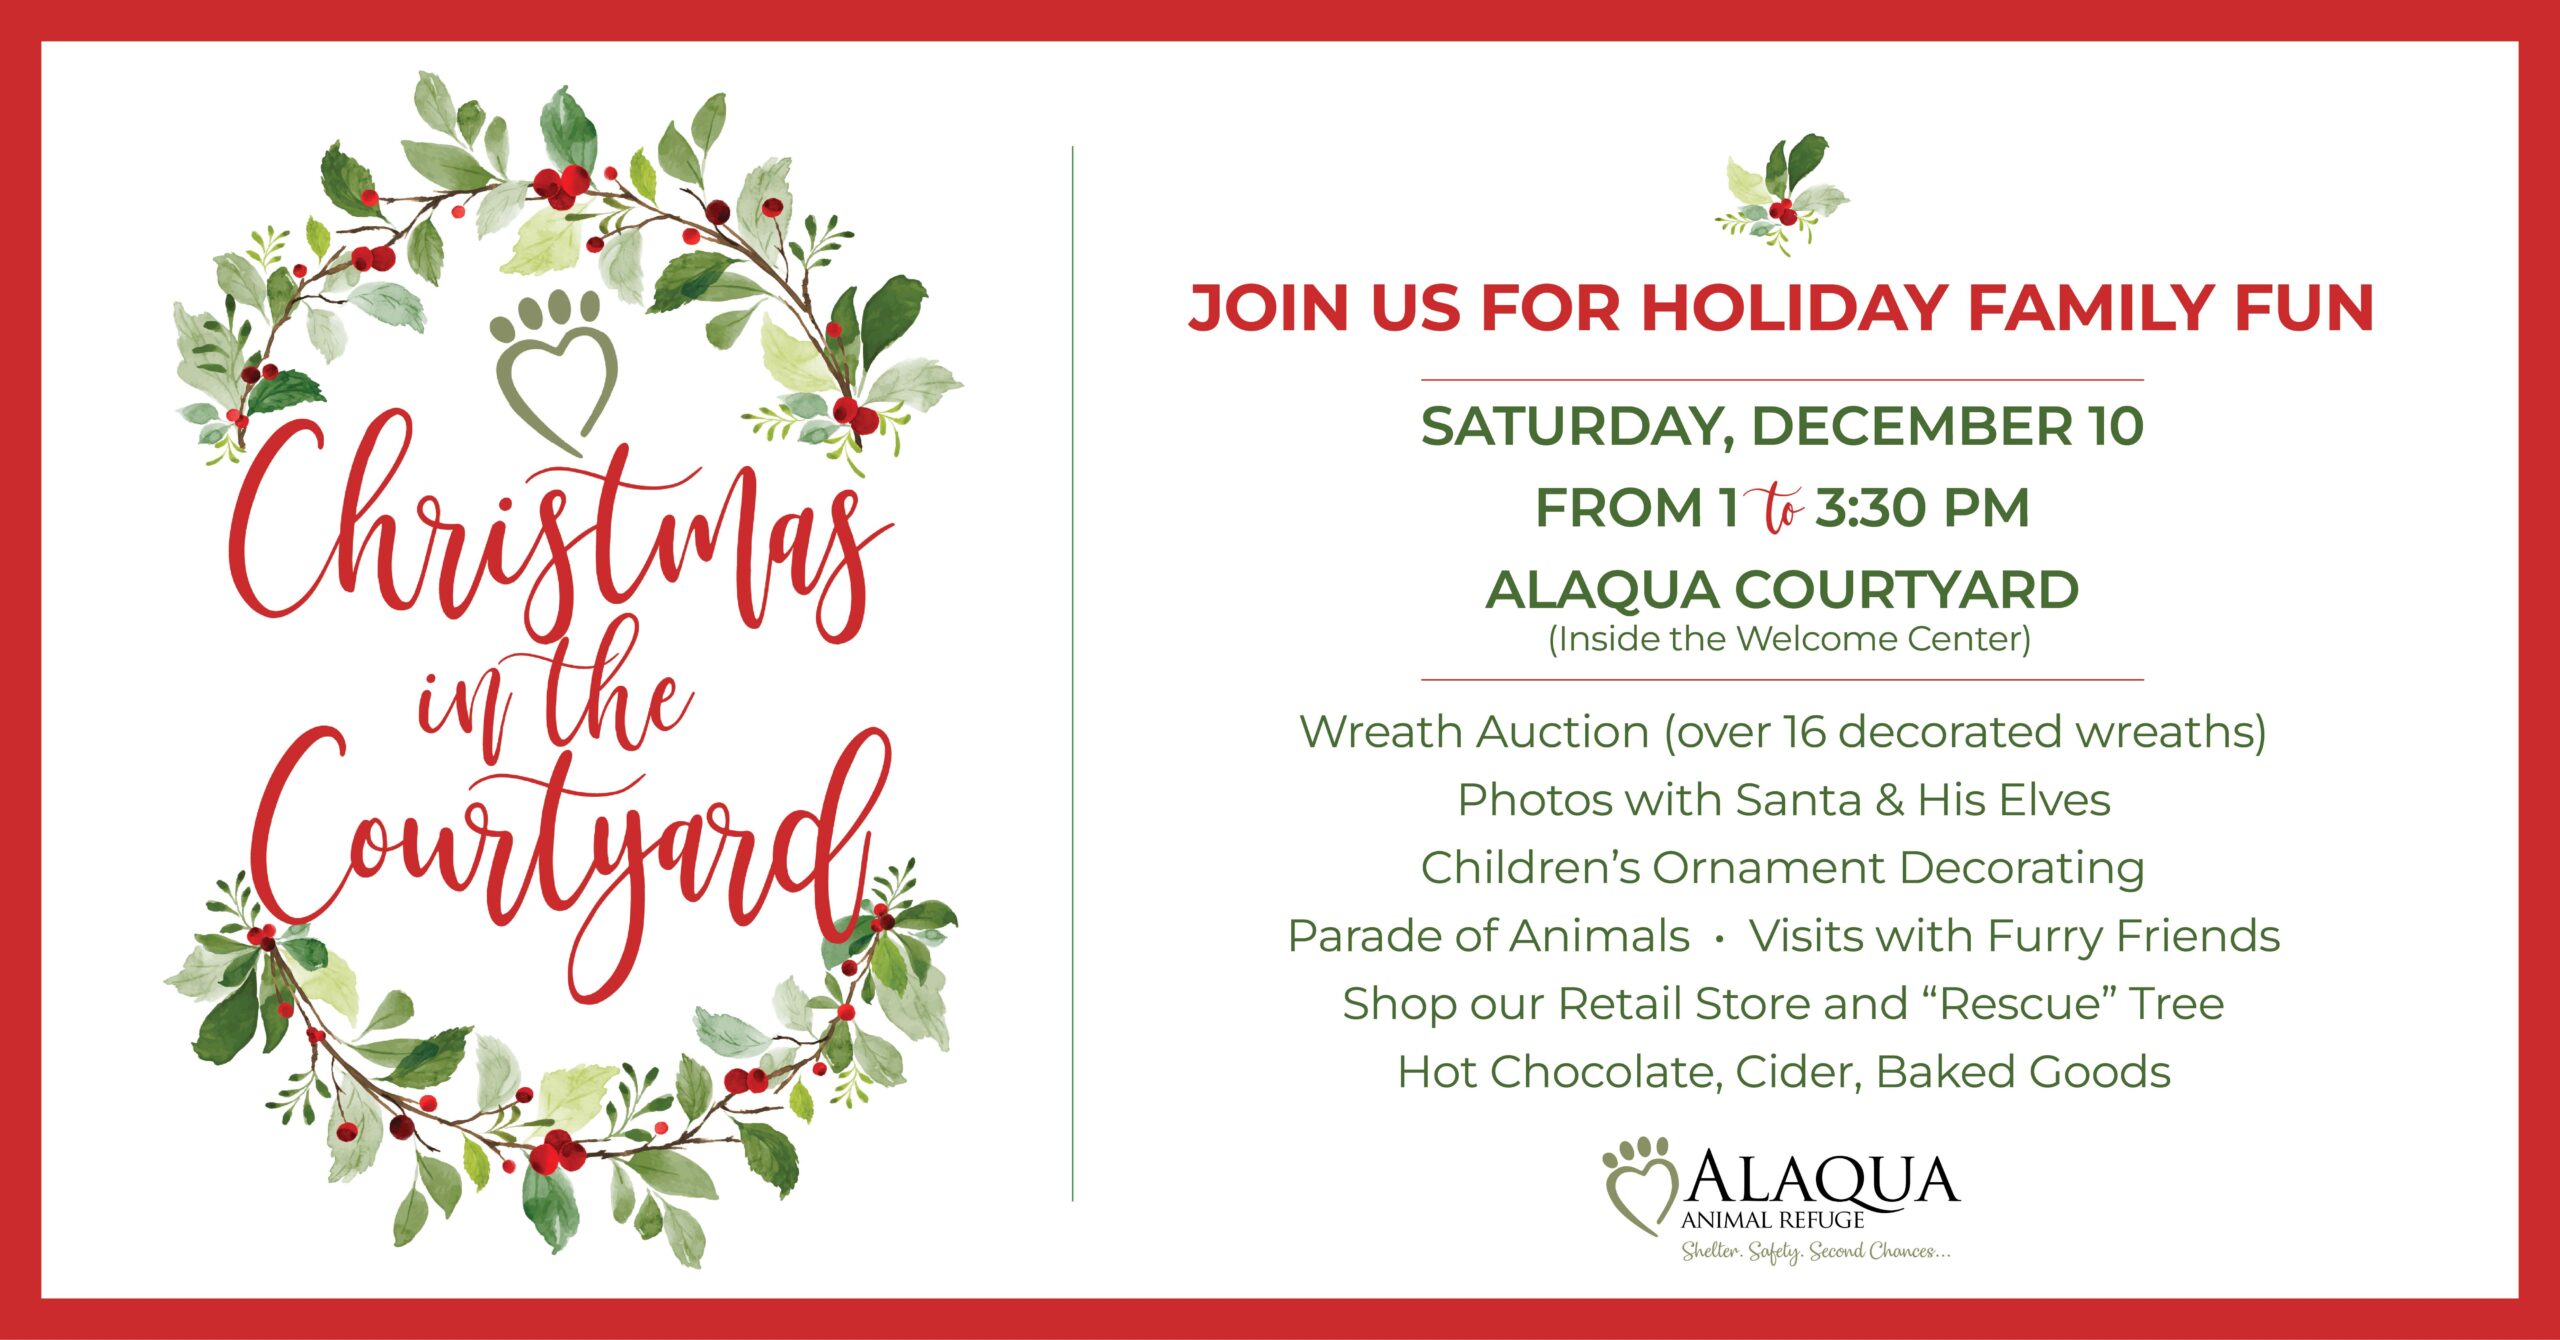 Alaqua Animal Refuge Announces Christmas in the Courtyard on Saturday, December 10